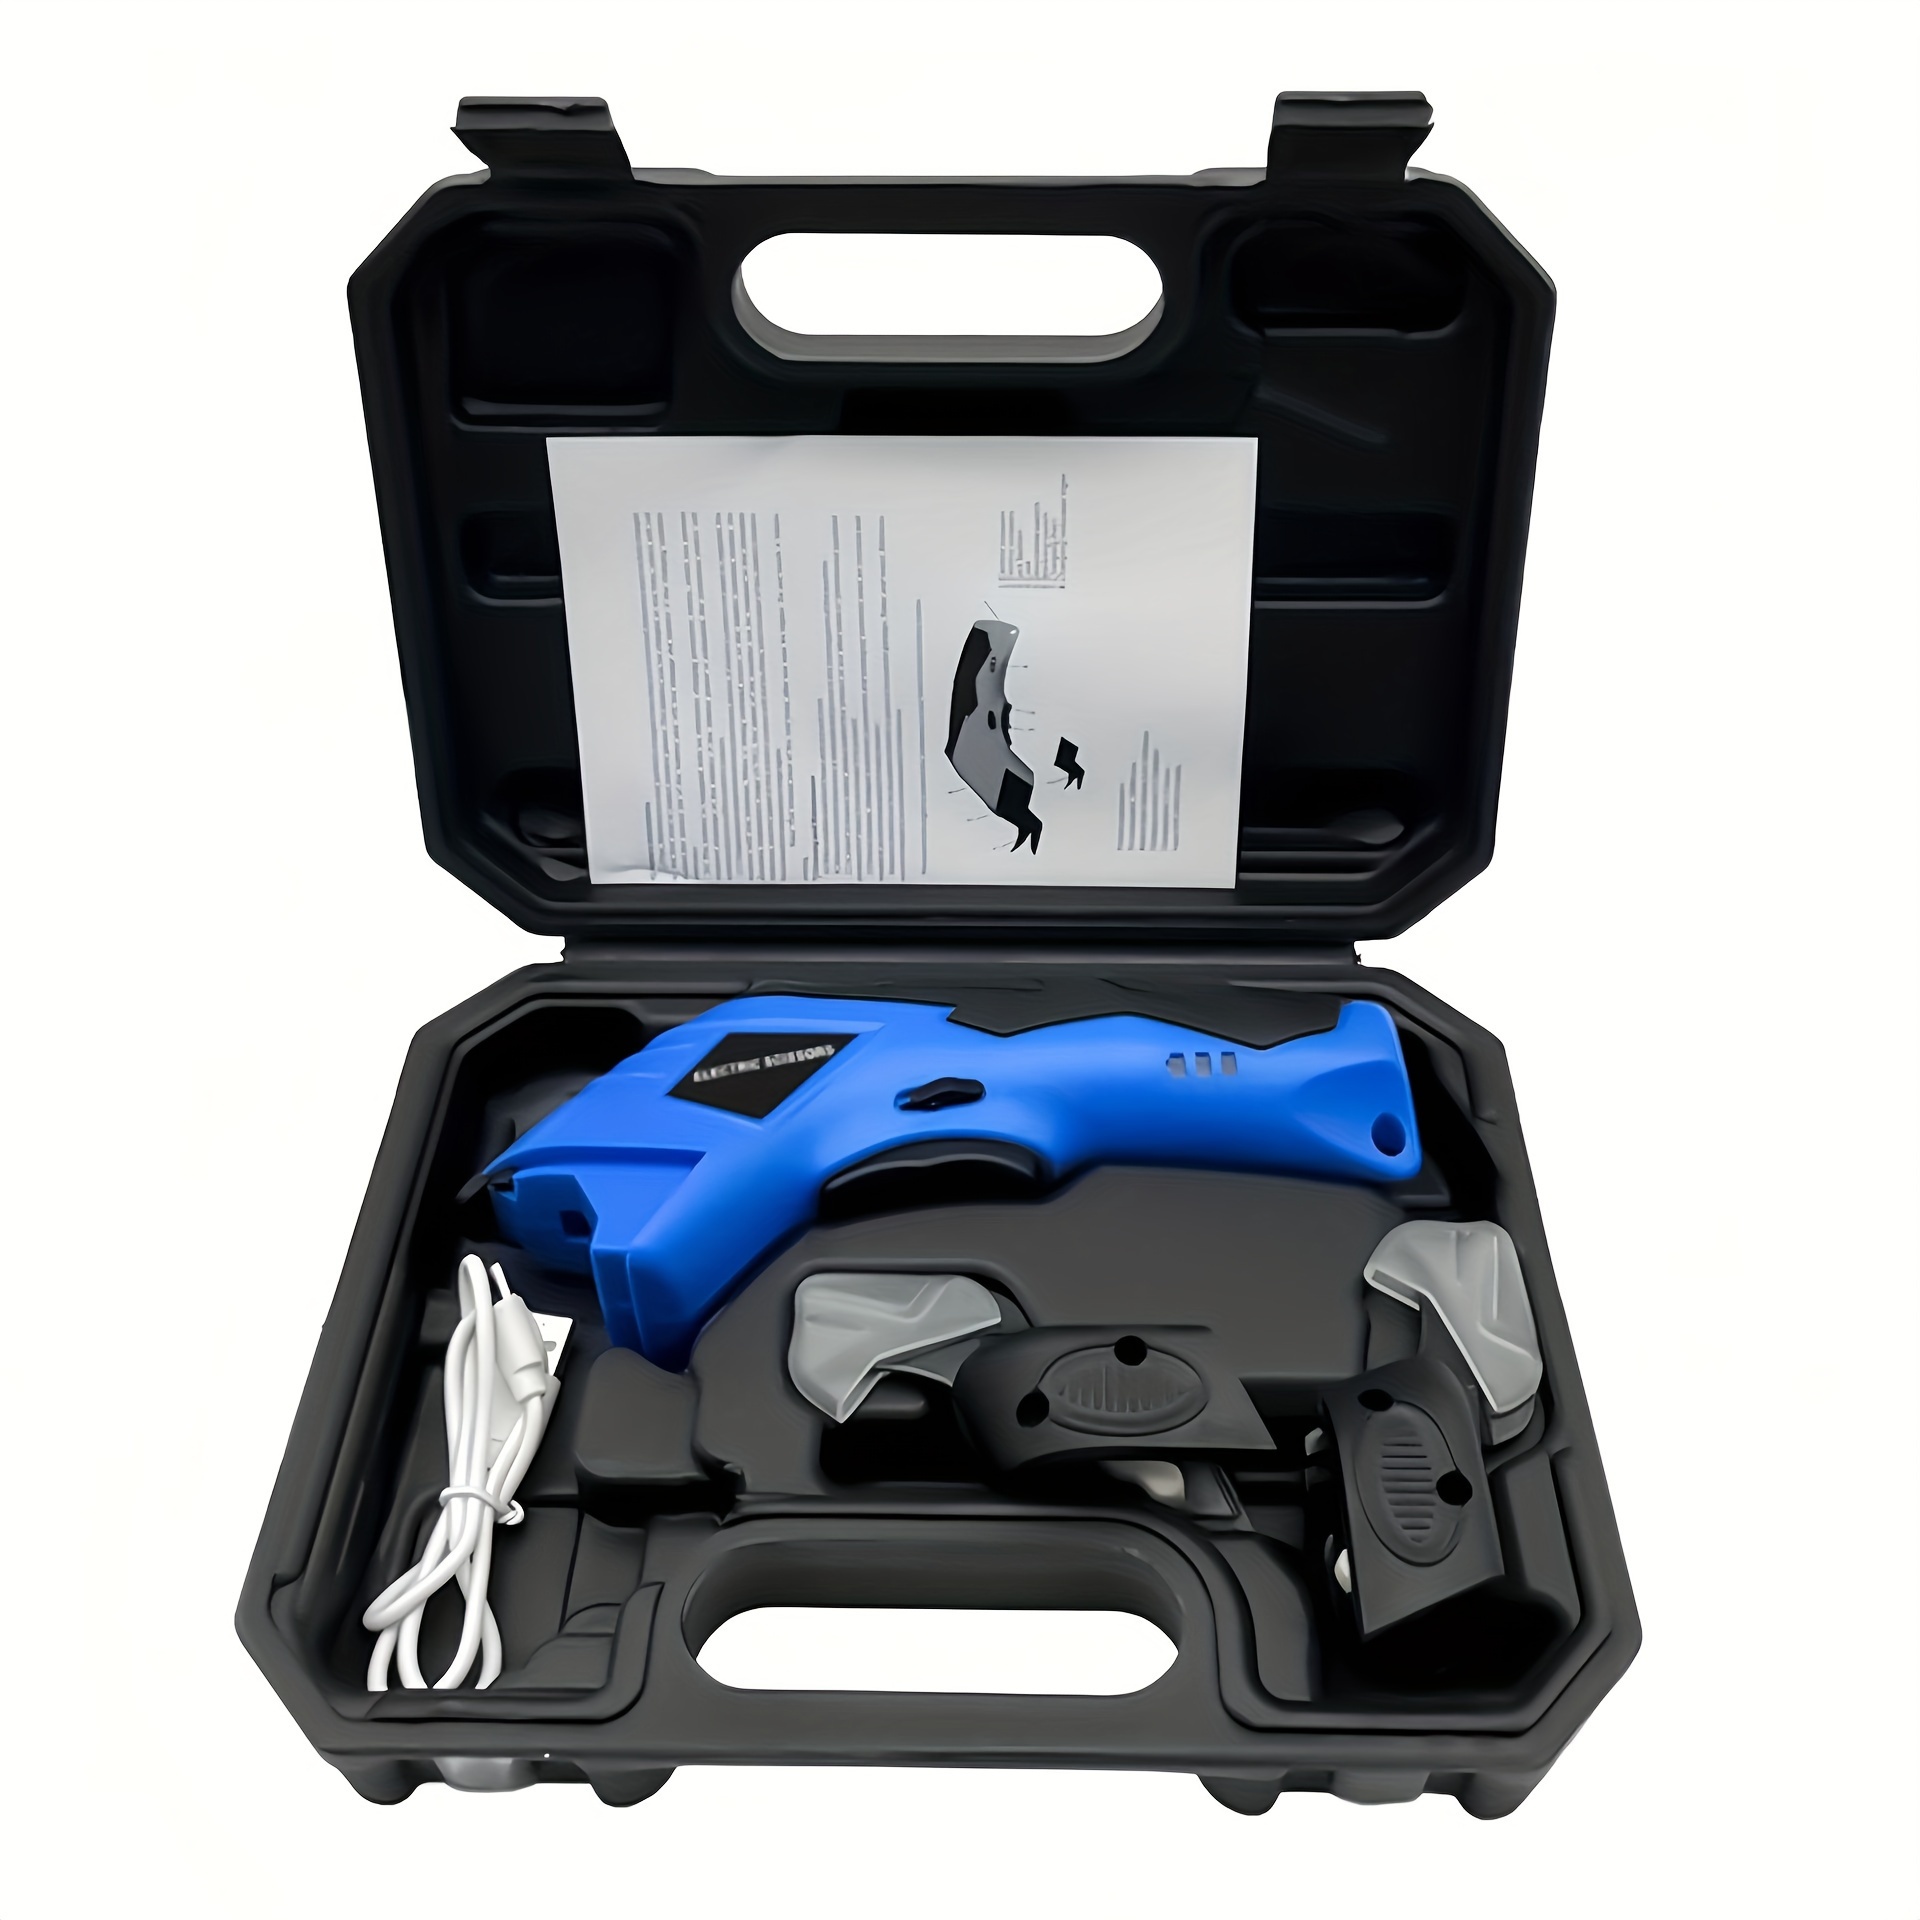 Cordless Electric Scissors 2000mAh Rotary Cutter Shear For Home Cutting  Tools.